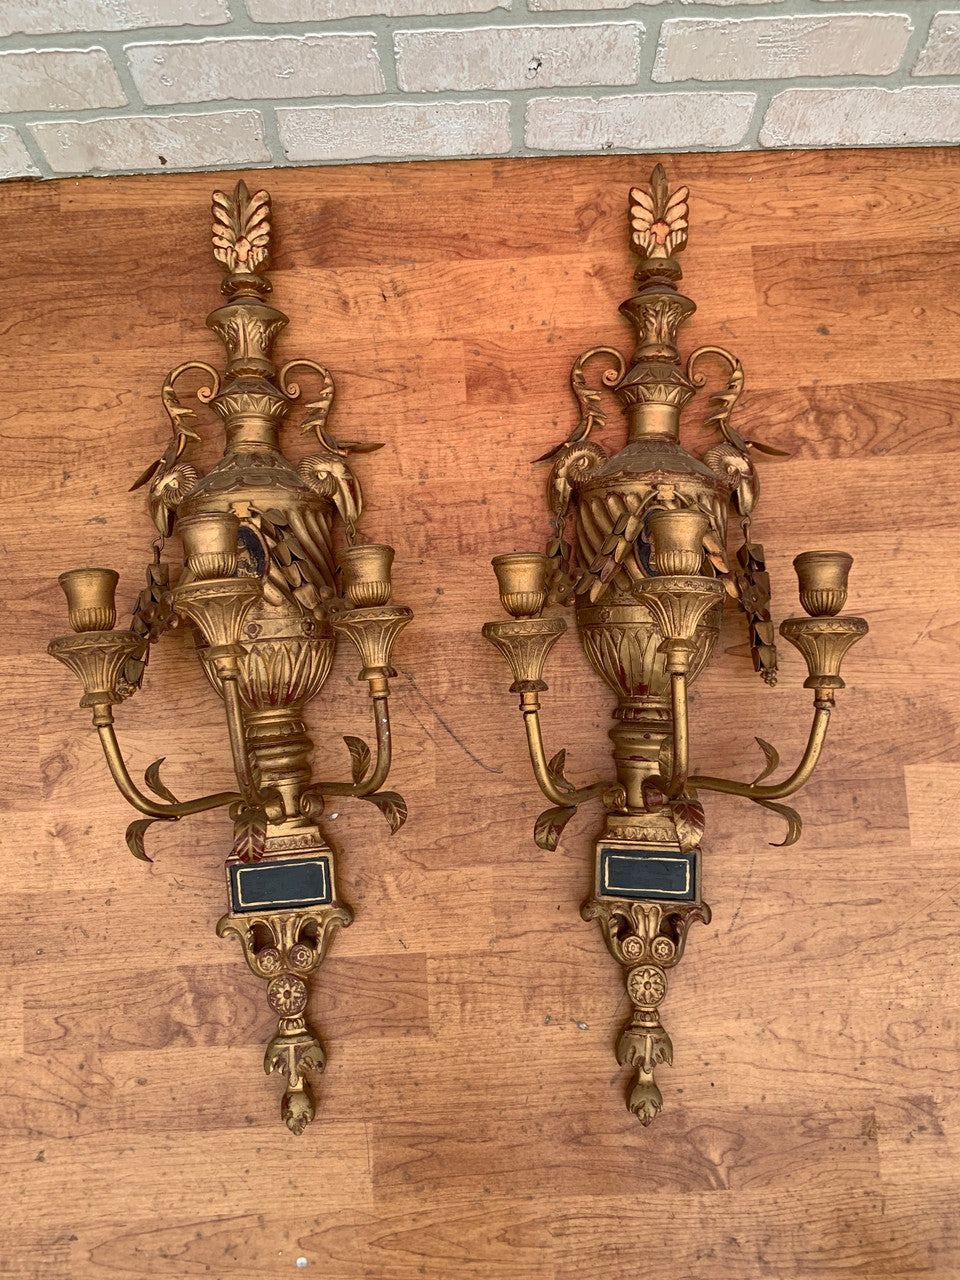 Antique Neoclassical Style Saltram Gilded Three Arm Candle Wall Sconces - Pair